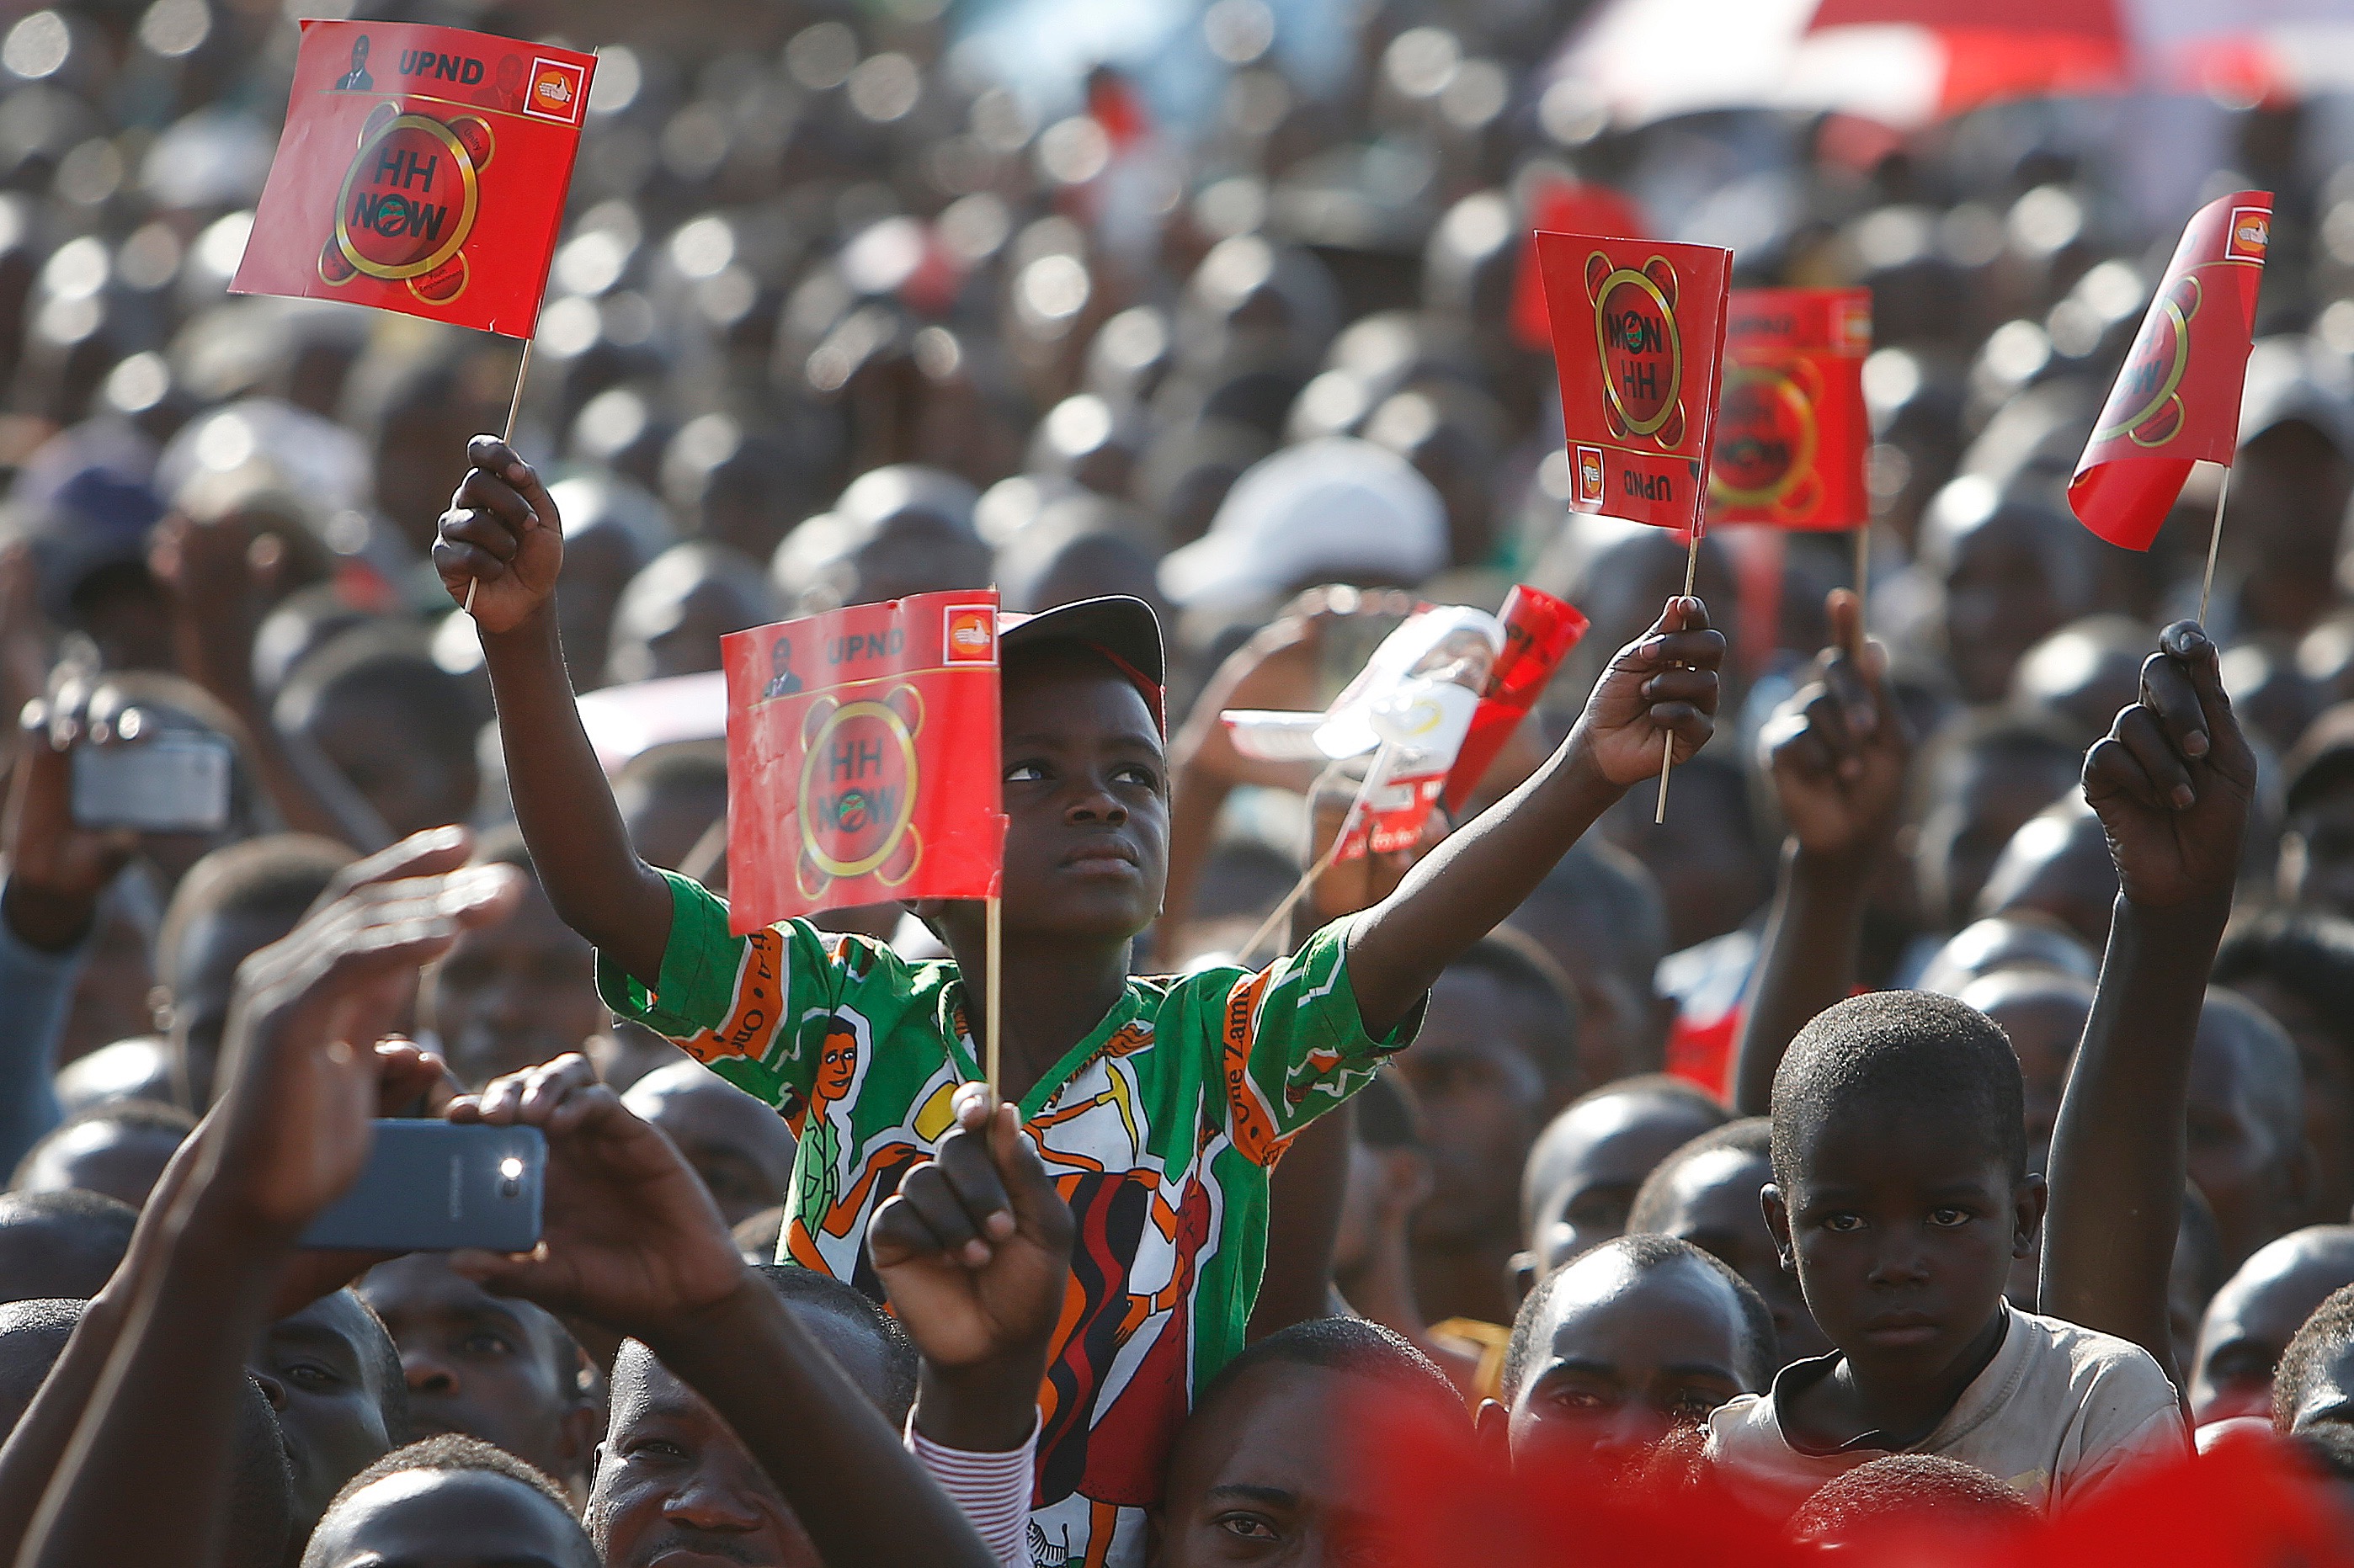 HH campaign rally in Kanyama compound, Sunday, Nov. 23, 2014, in Lusaka, Zambia. (Photo by Jason DeCrow)